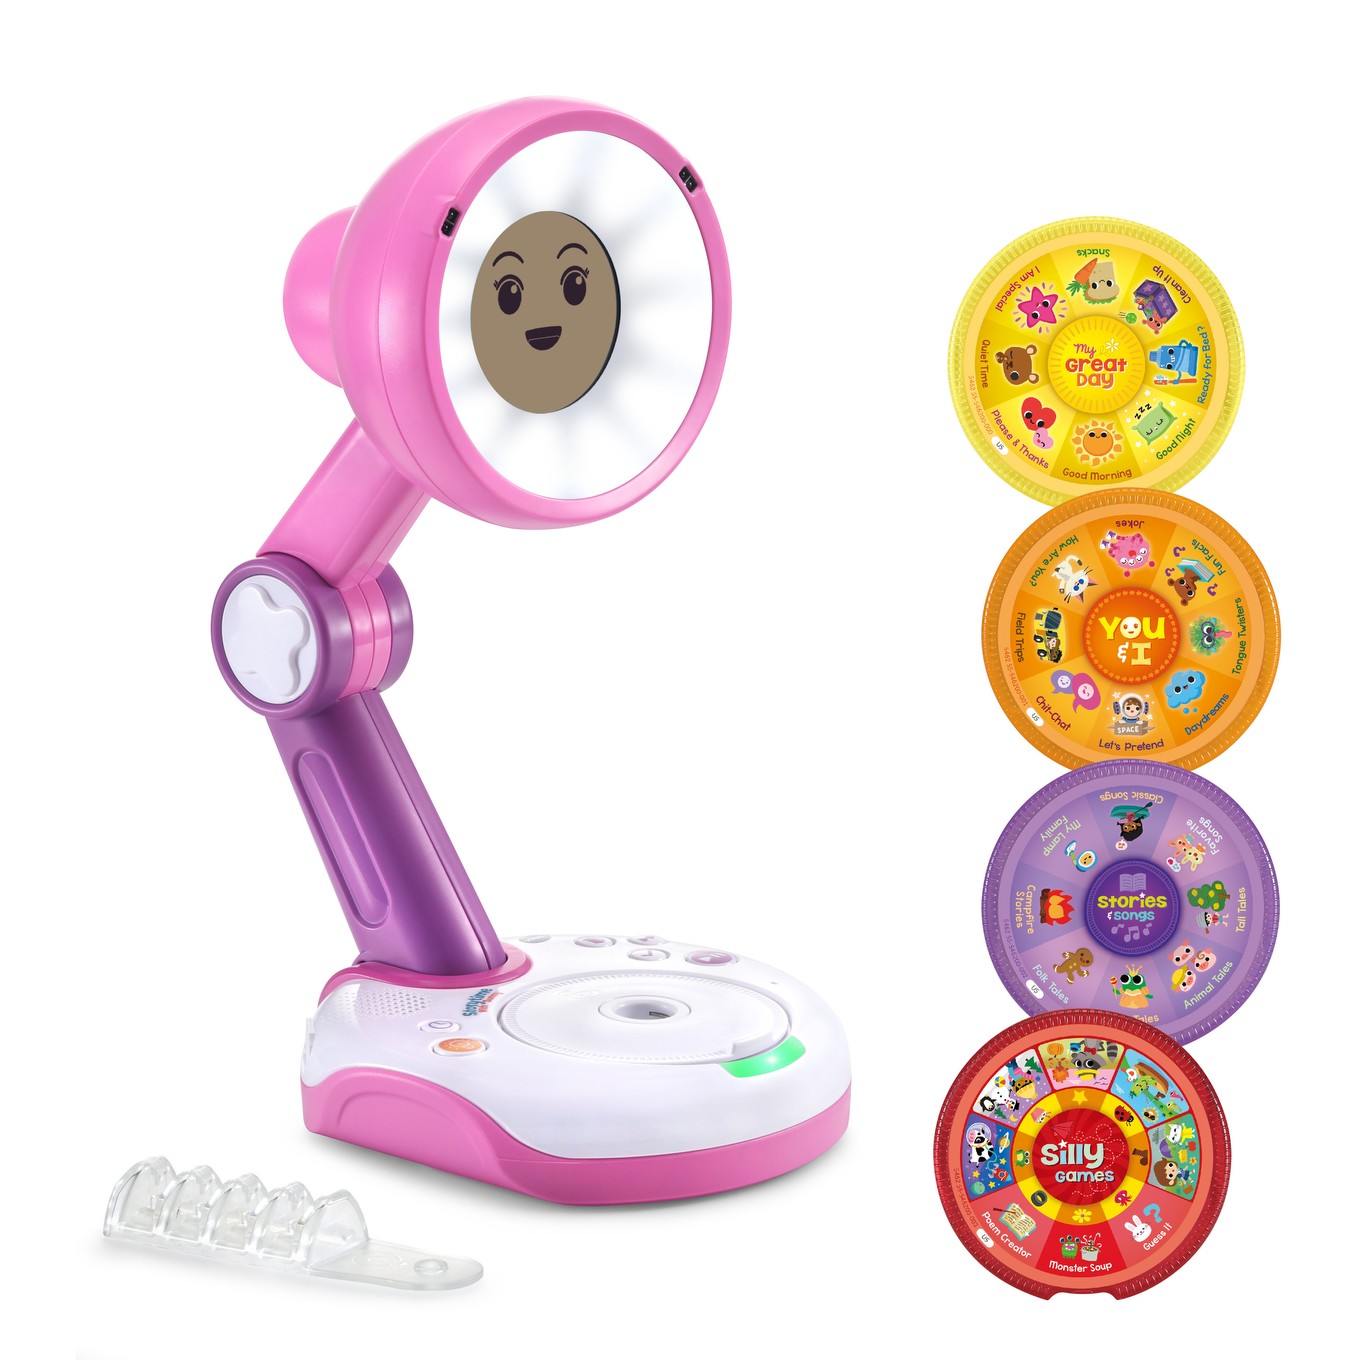 VTech - Funny sunny rose, interactive companion, stories and song